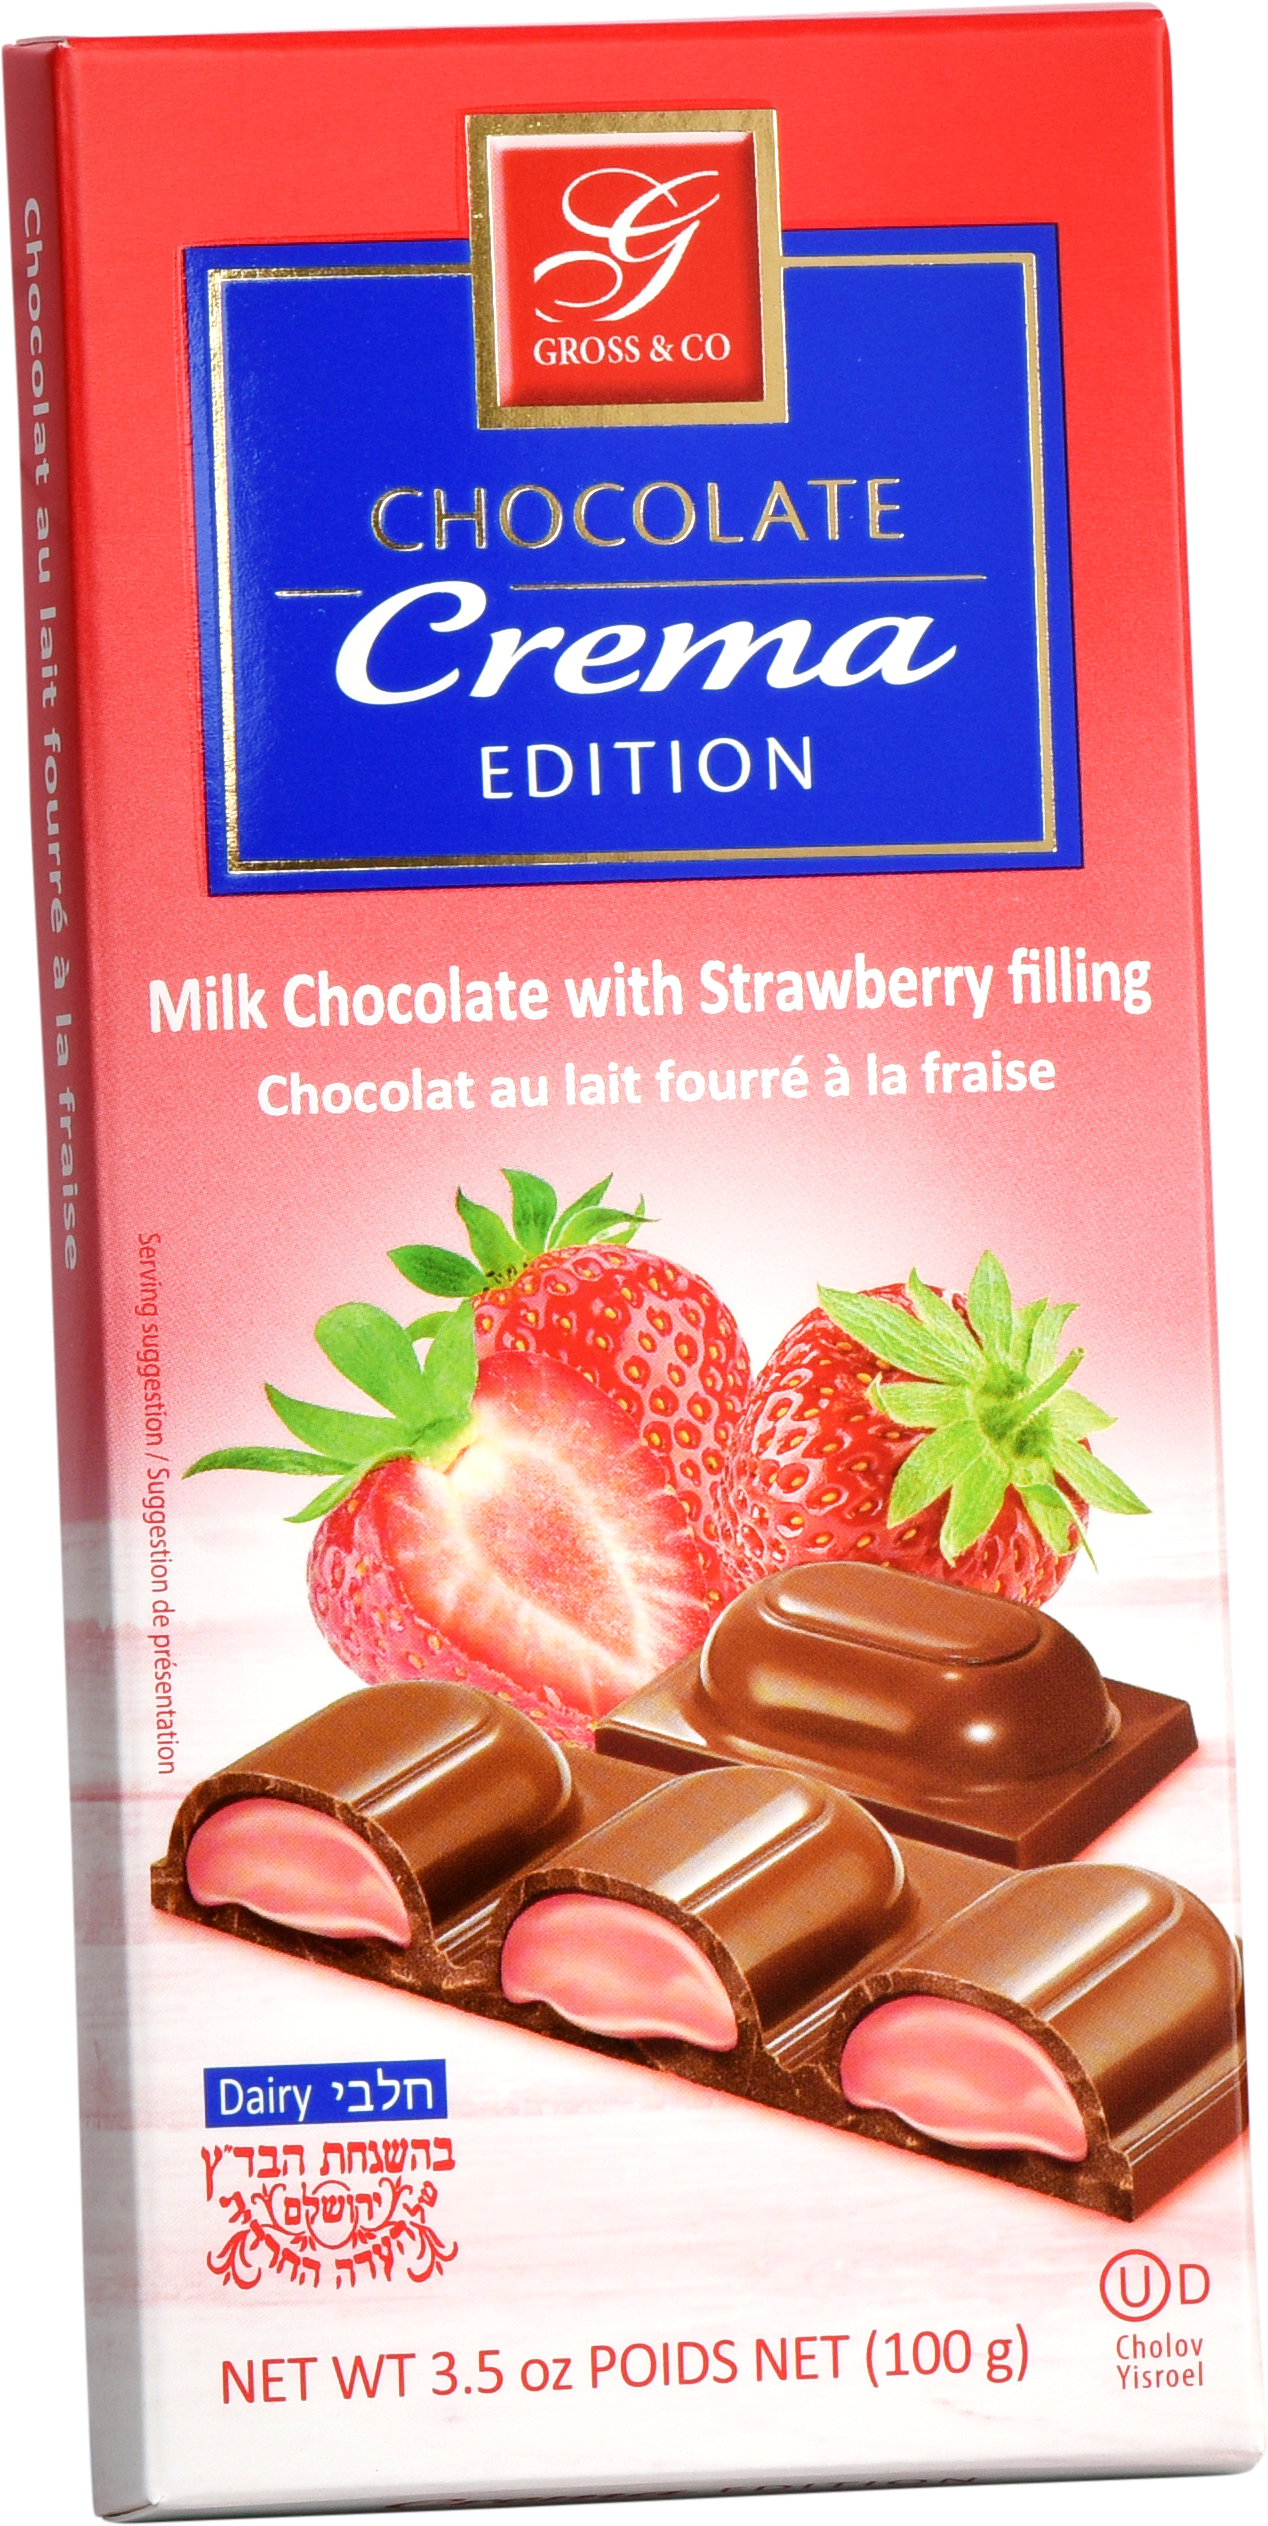 MILK CHOCOLATE WITH STRAWBERRY FILLING – Shufra